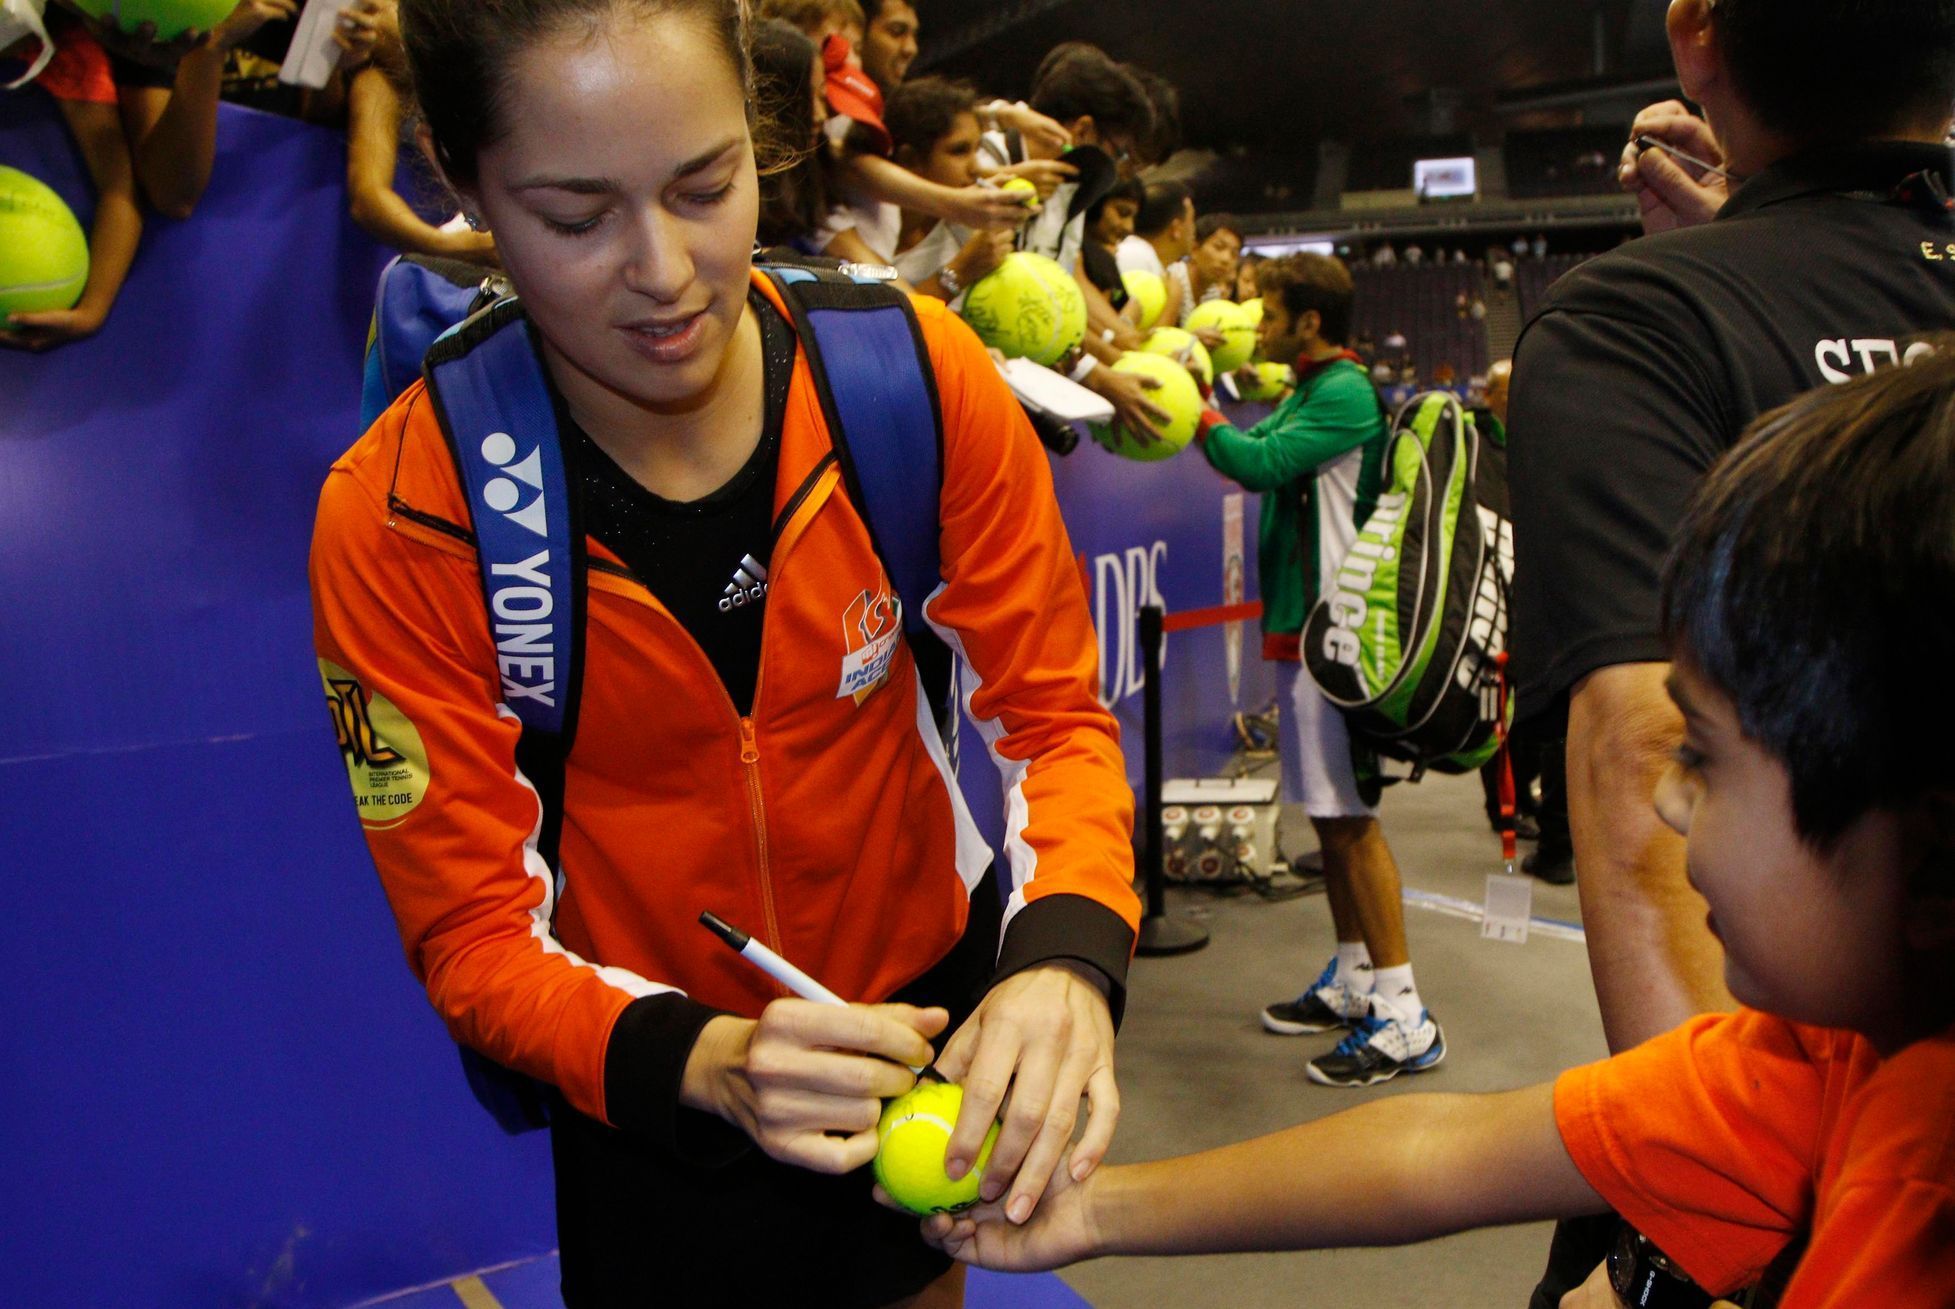 Team Micromax Indian Aces'  Ana Ivanovic of Serbia signs autographs after matches against UAE Royals at the International Premier Tennis League (IPTL) in Singapore